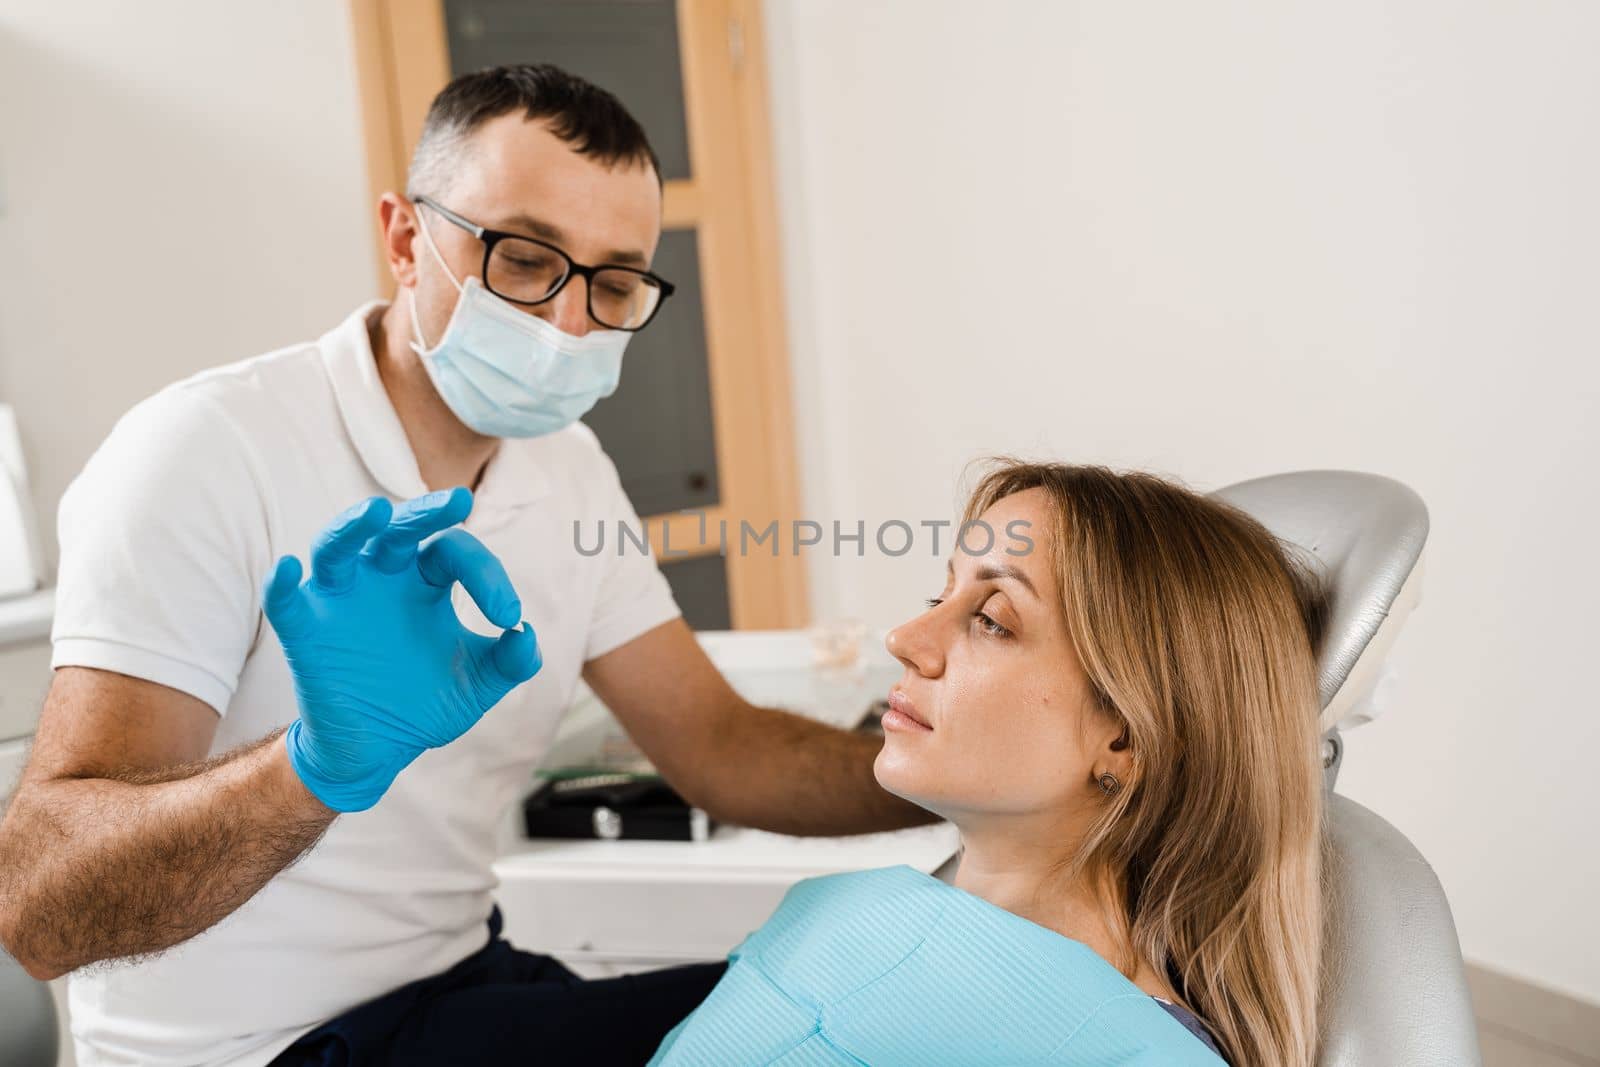 Dentist showing dental veneer teeth implant to woman patient in dental clinic. Dentistry. Consultation with dentist about tooth implantation and whitening